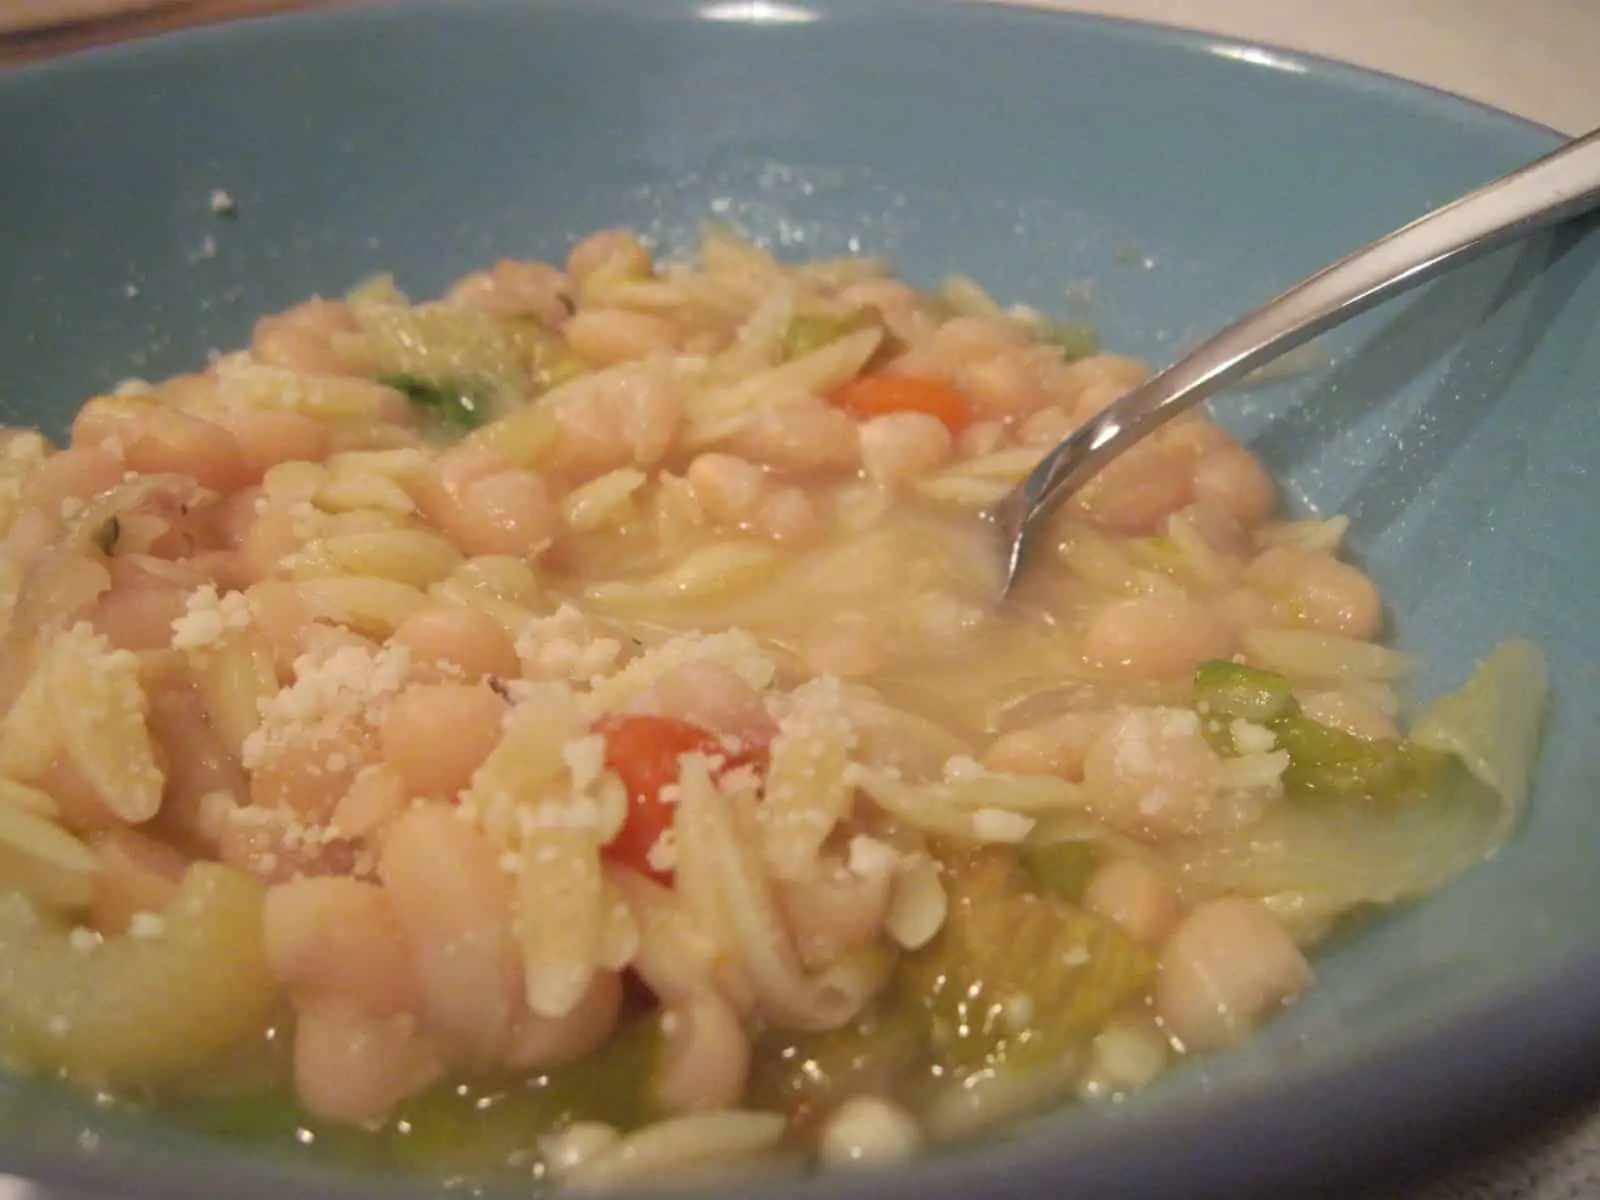 This is a whole-meal soup that draws its hearty peasant flavor from beans, onions, garlic, celery, carrots, ham, tiny pasta, and escarole. via @Mooreorlesscook